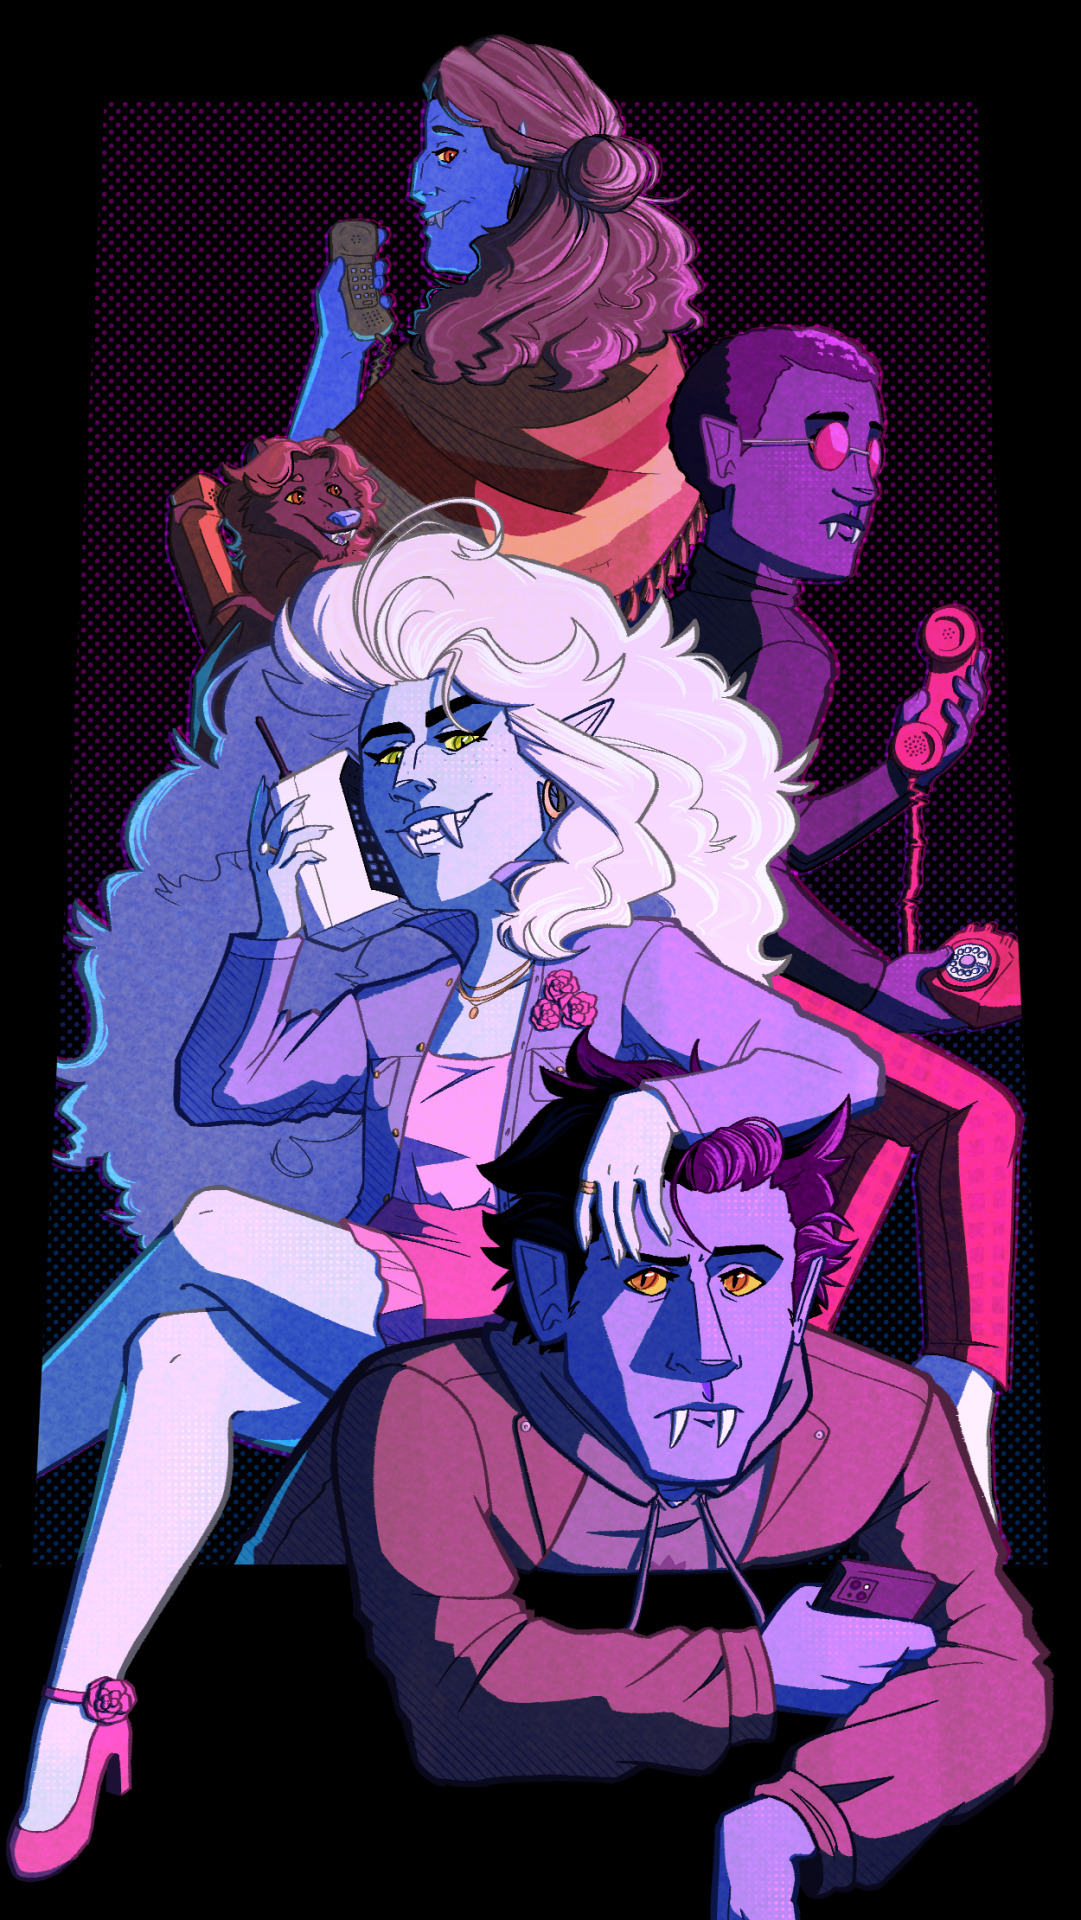 redraw of this piece from march last year
the most obnoxious group call imaginable, now with 80% more bisexual lighting